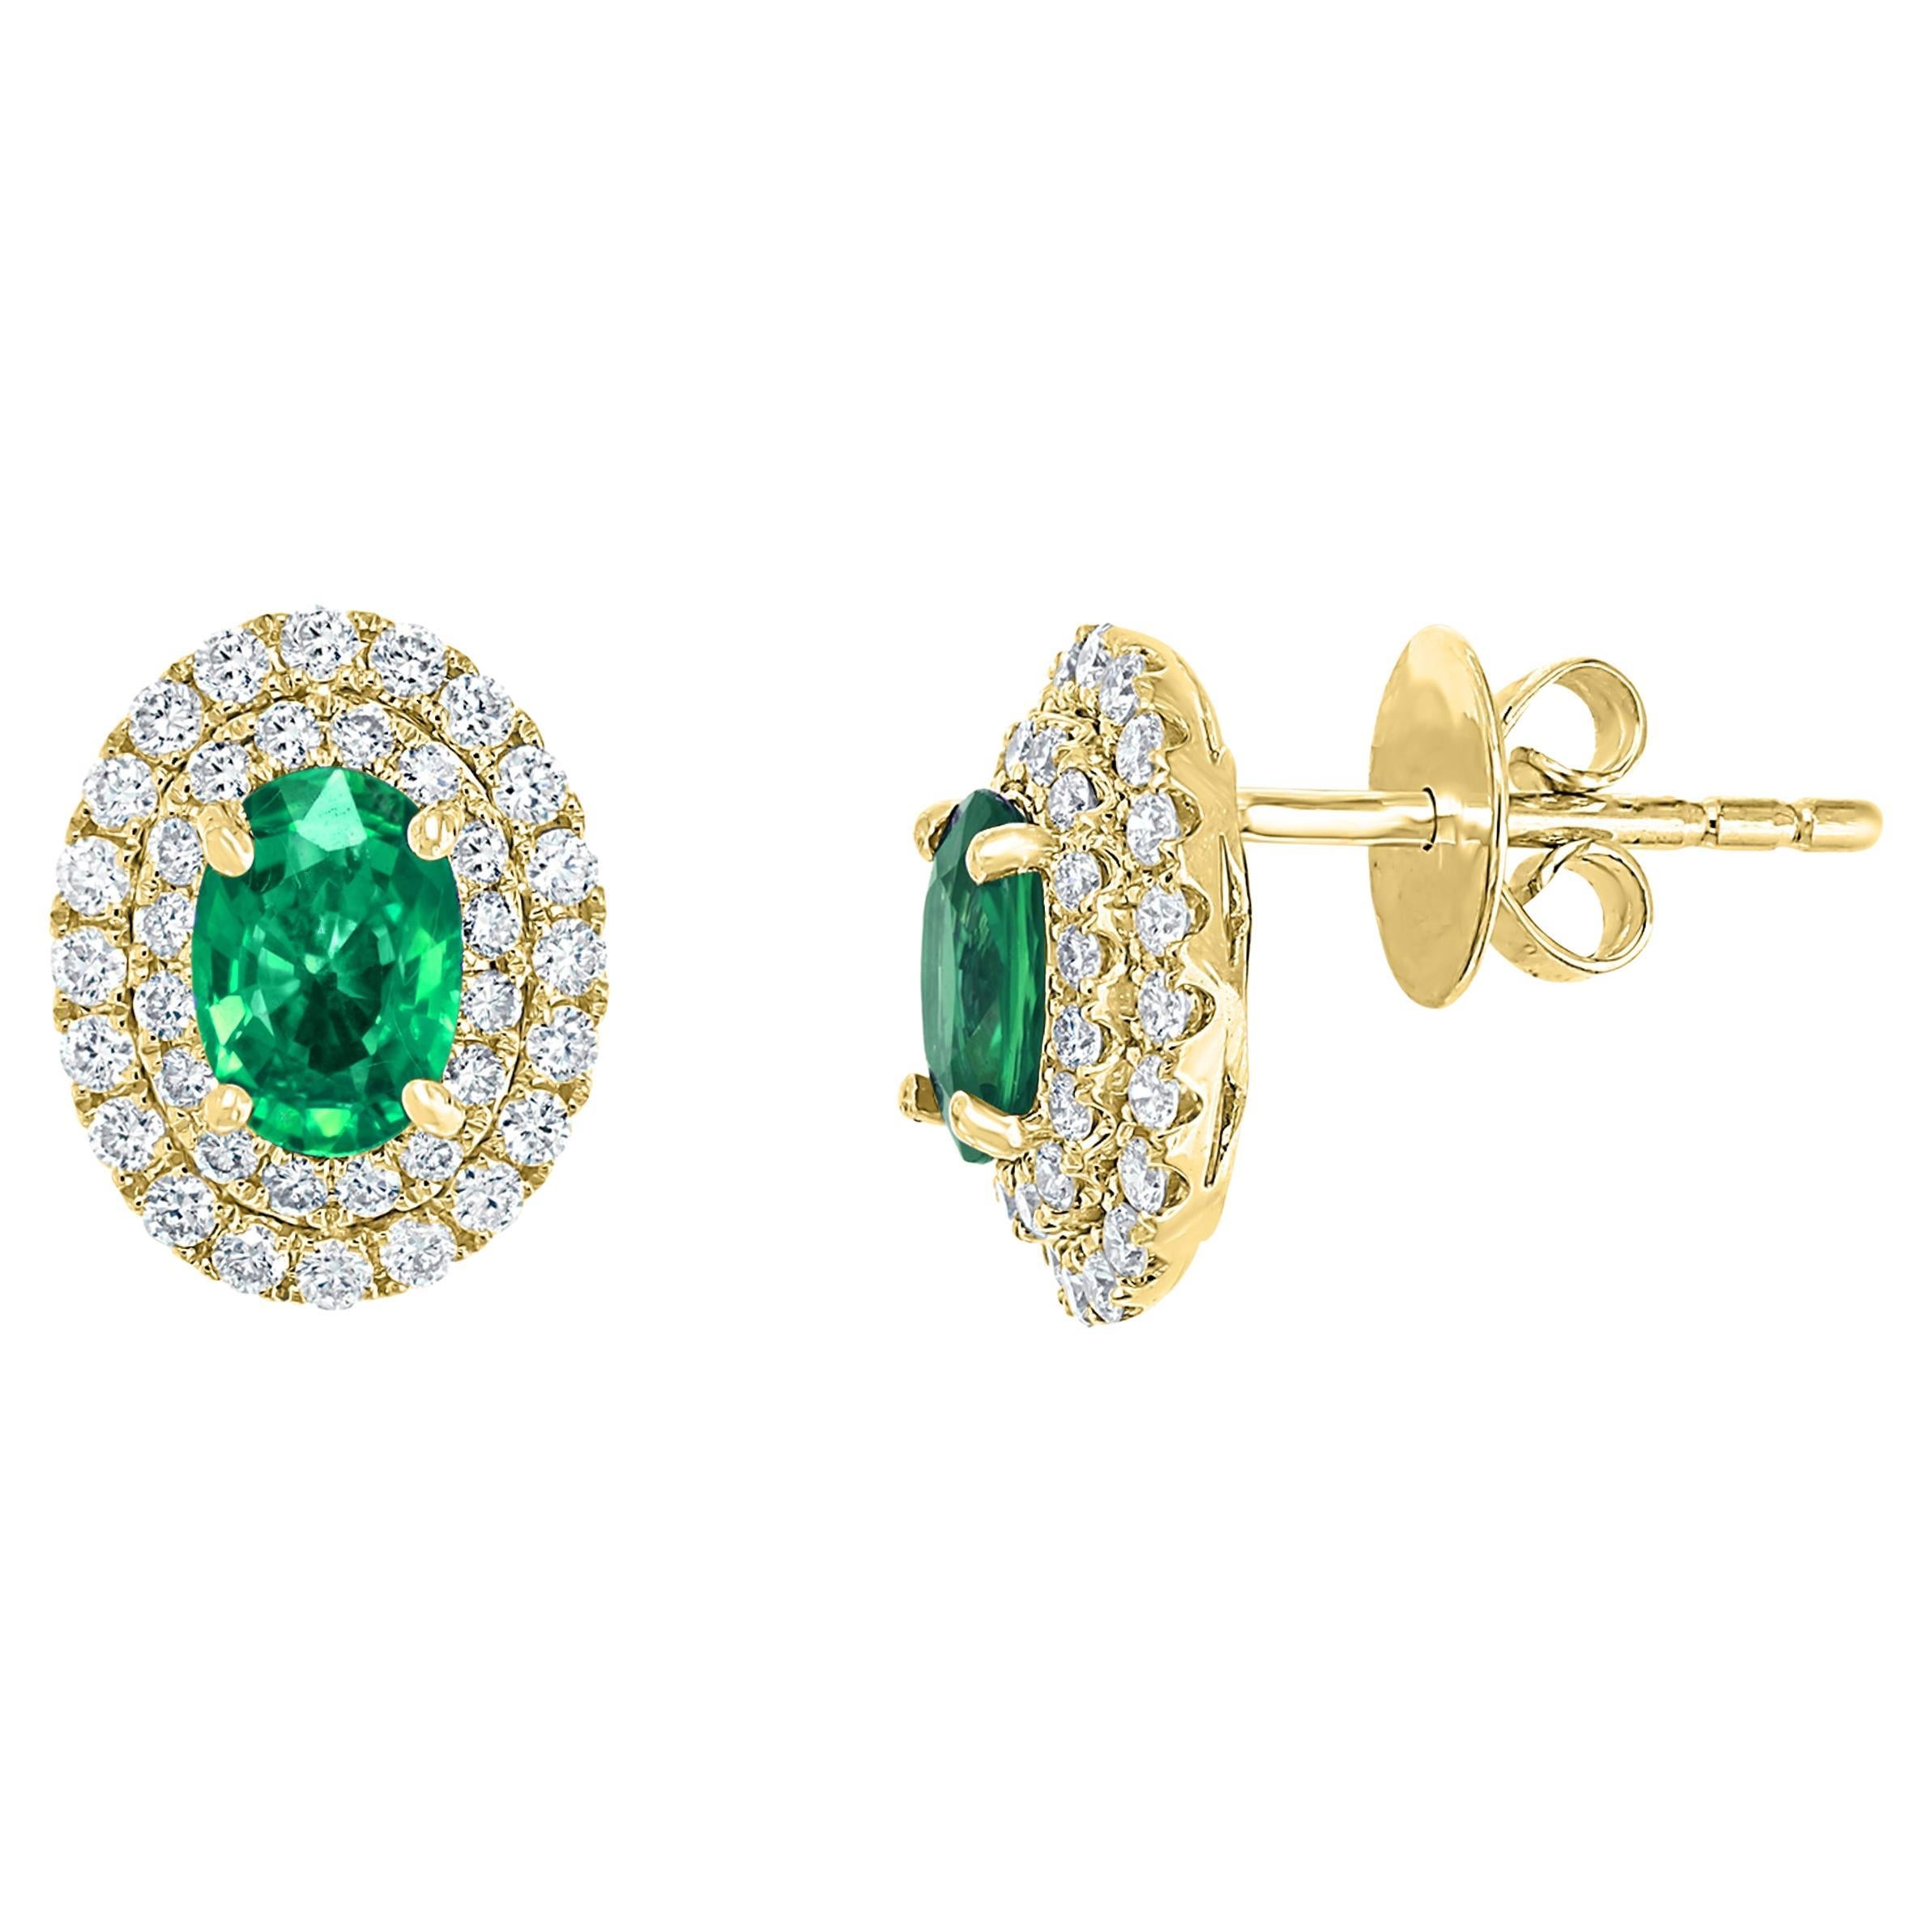 0.89 Carat Oval Cut Emerald and Diamond Stud Earrings in 18K Yellow Gold For Sale